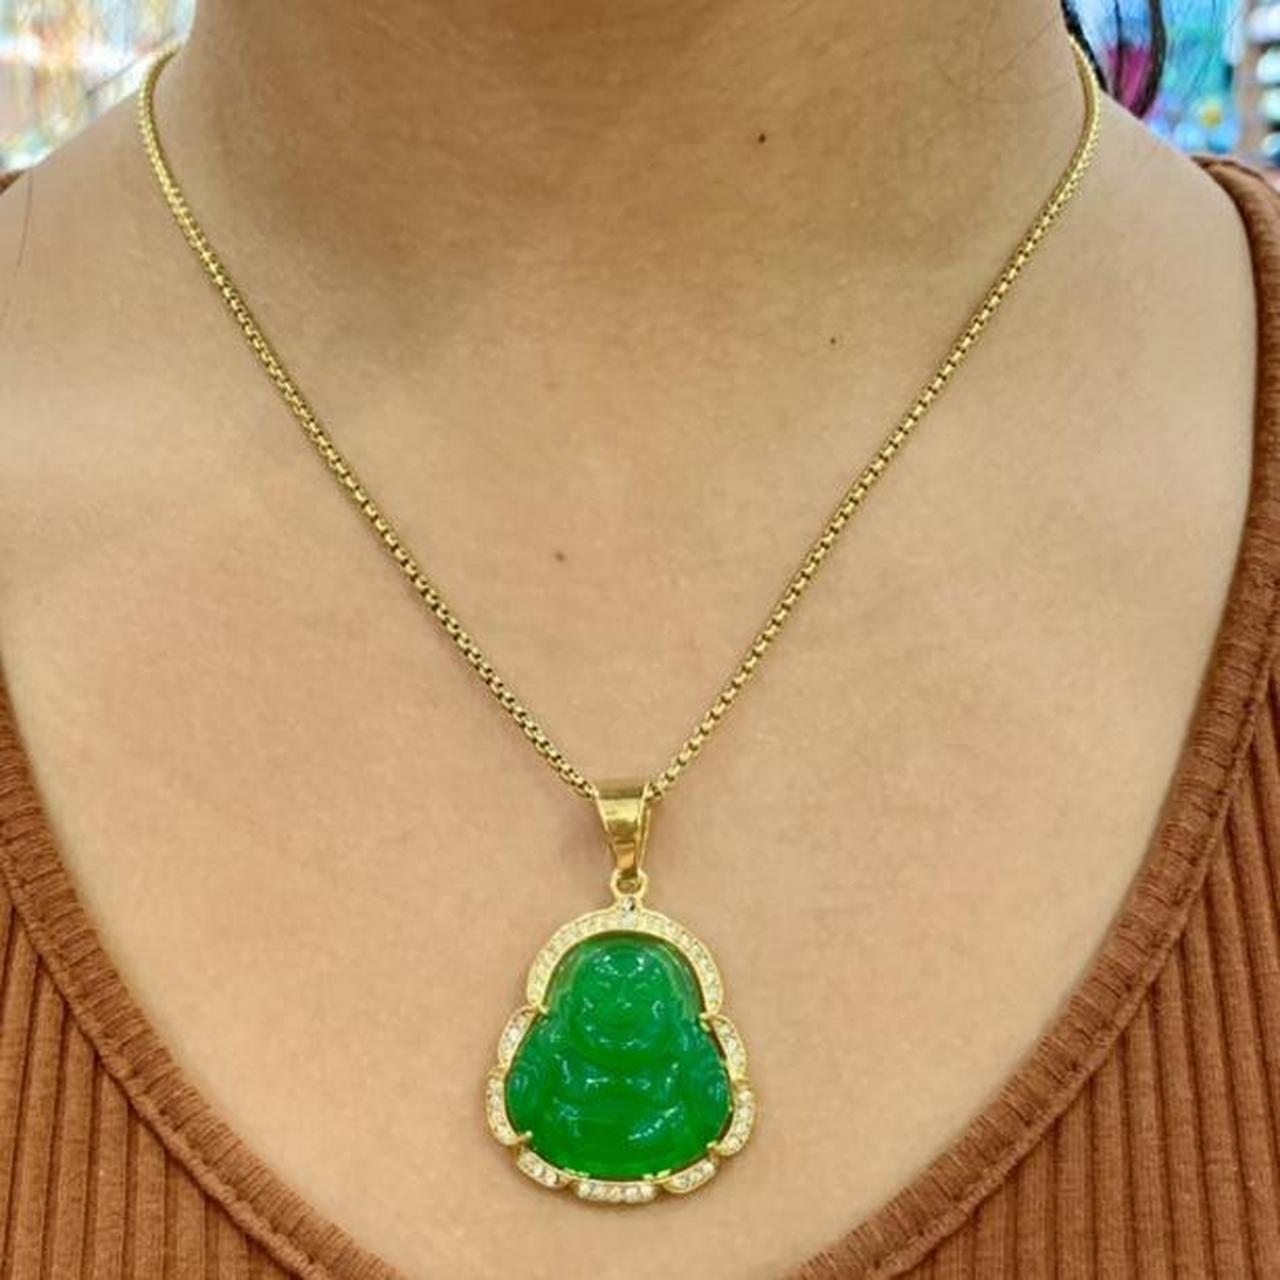 Authentic Green Jade Buddha Necklace, Buddha Head Pendant with Chain  Necklace, Green Buddha Necklace, Silver Buddha Necklace | Buddha necklace,  Mom necklace personalized, Family tree necklace birthstones